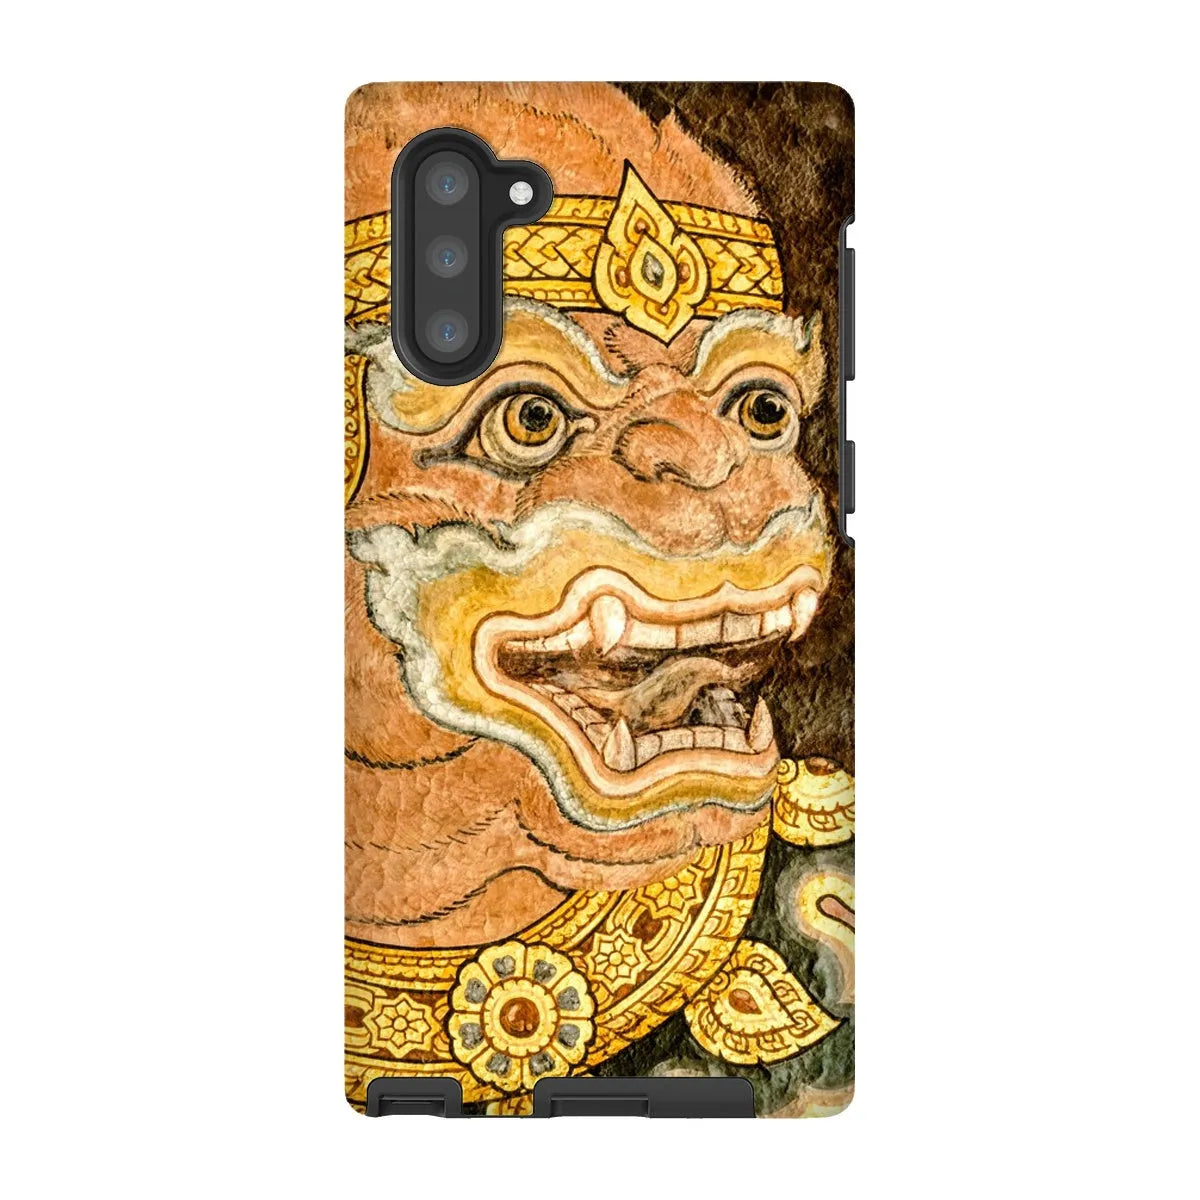 Monkey See - Traditional Thai Aesthetic Art Phone Case - Samsung Galaxy Note 10 / Matte - Mobile Phone Cases